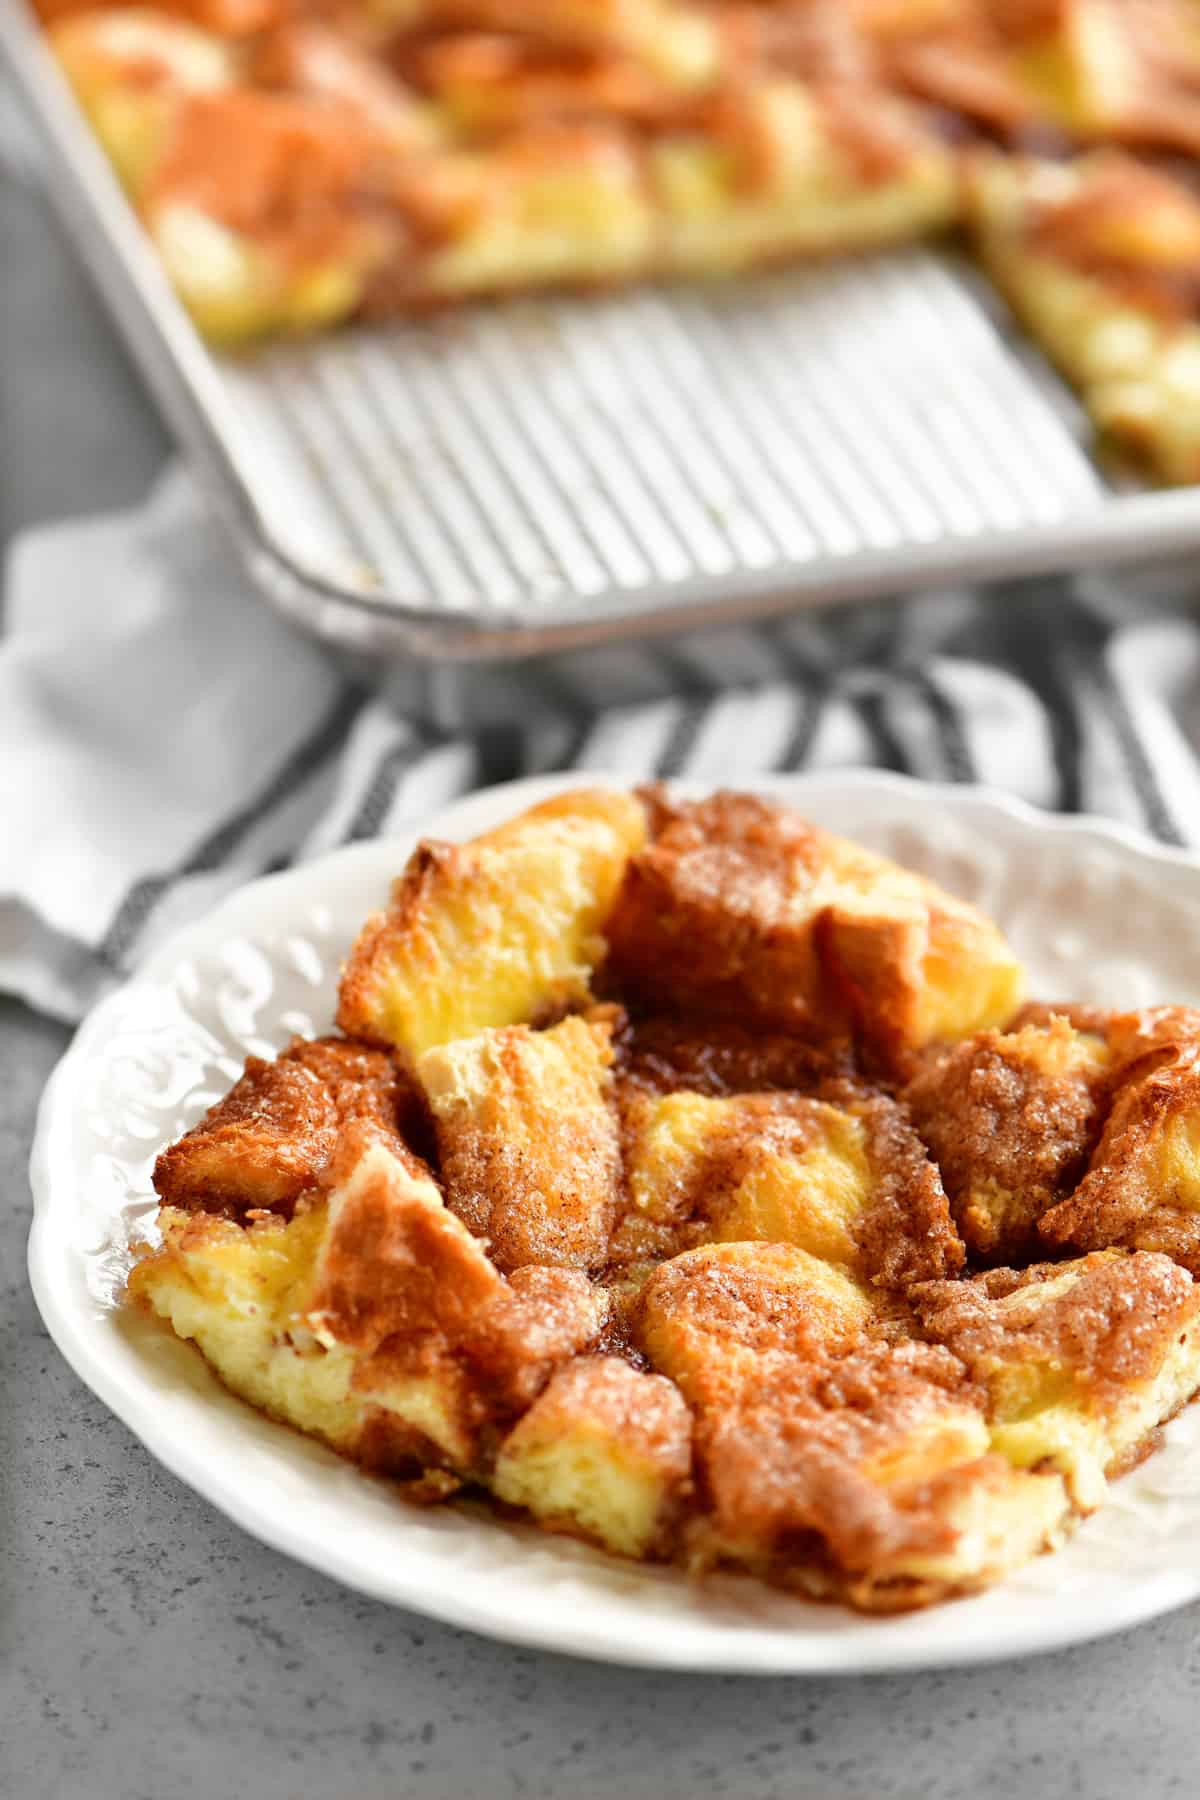 yummy french toast casserole on a plate